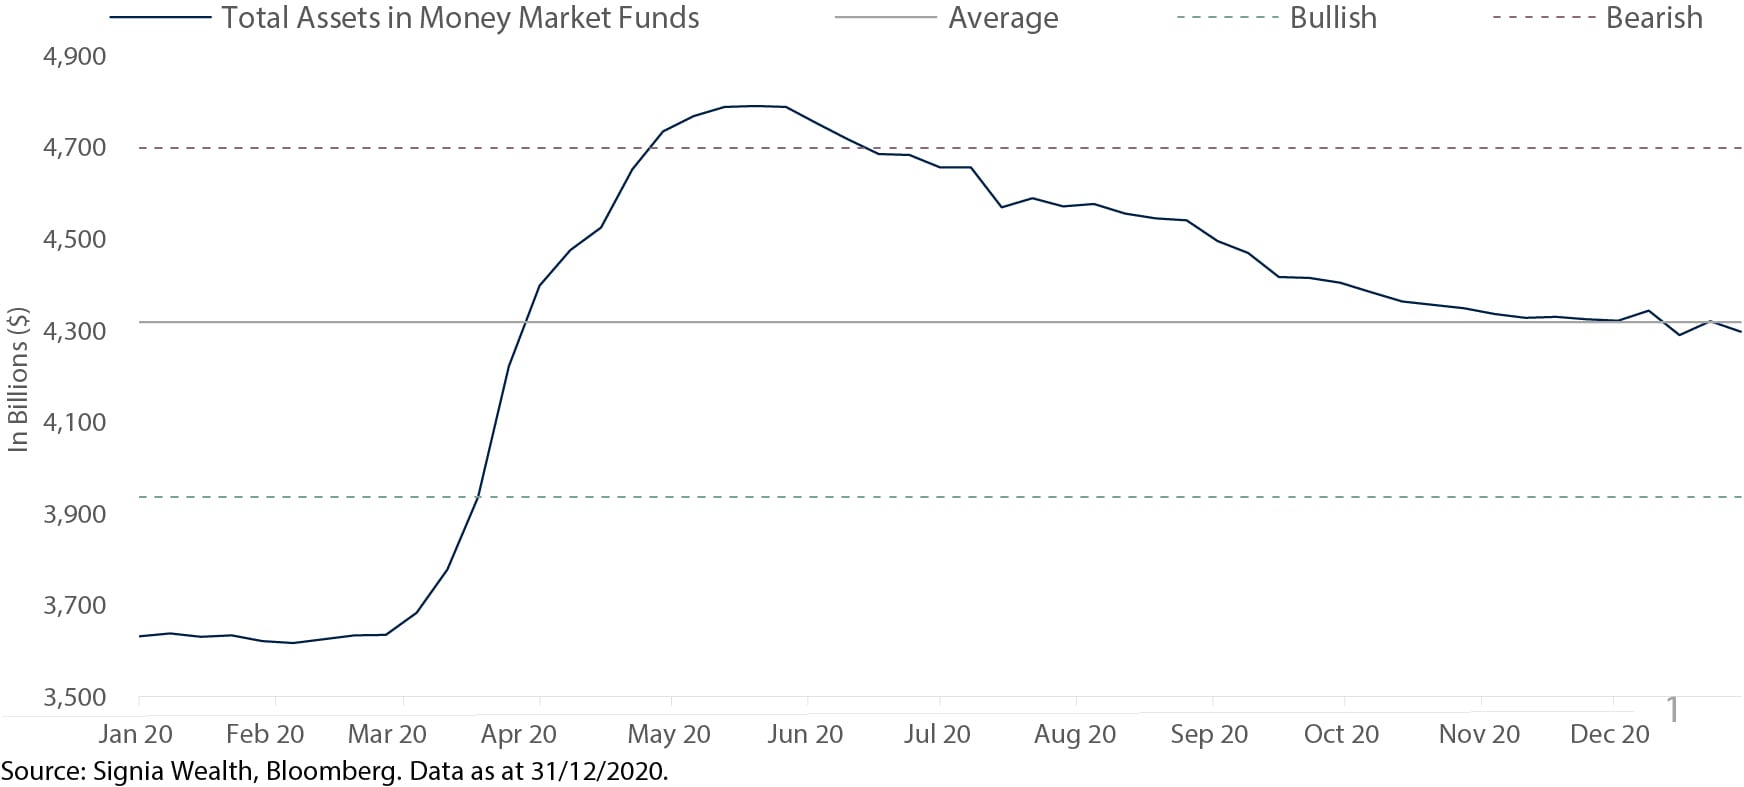 Total Assets in Money Market Funds